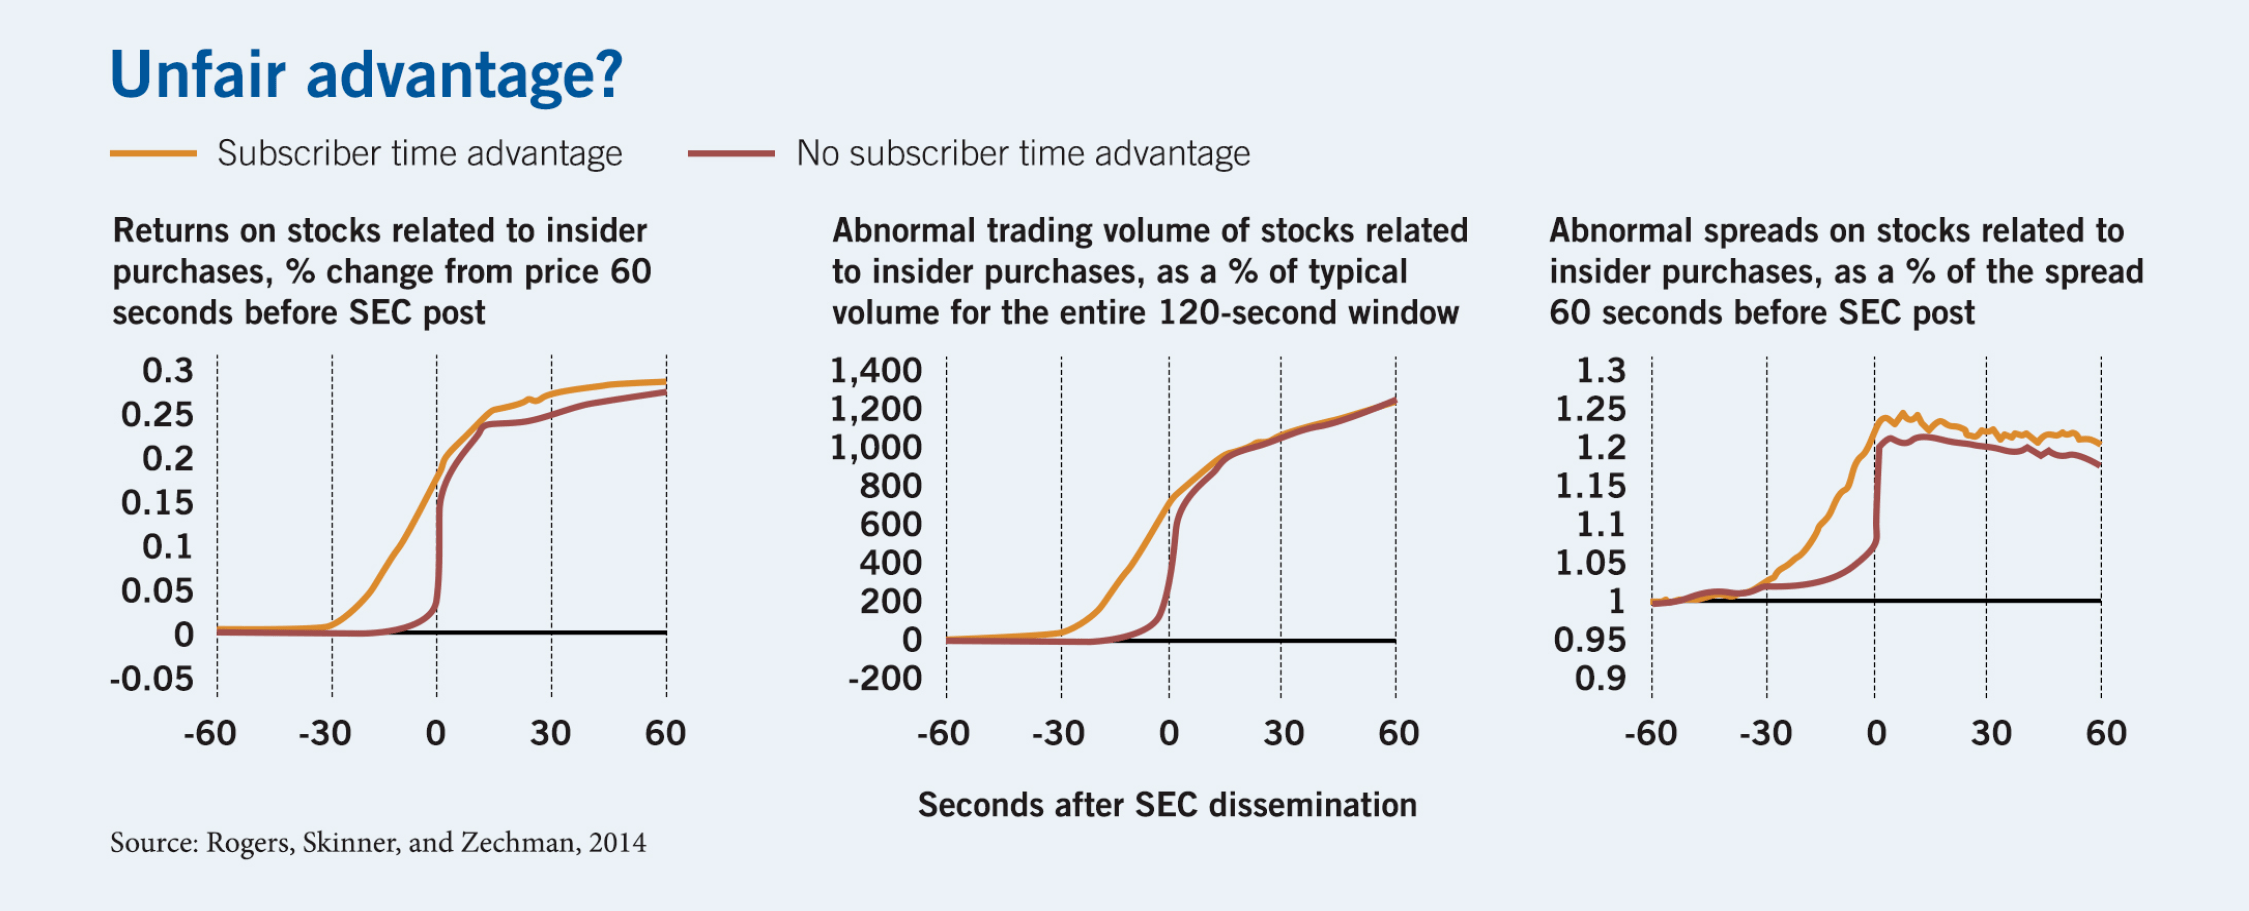 A series of three line charts showing stock returns on the types of trades described in the article text, with the number of seconds before and after the SEC posting on the x-axis. The first chart plots the price change from sixty seconds prior to the SEC posting, with a line tracking subscribers with advance information starting to get higher returns thirty seconds prior and approaching twenty percent in the moment before the SEC posting. A second chart plots the percentage of abnormal trading volume, again showing subscribers getting a thirty-second jump, with their volume reaching seven hundred percent in the moment before the posting. A third chart plots the percentage of abnormal spreads, with subscribers again moving thirty seconds early, with abnormal spreads of nearly one-point-two-five percent in the moment before the posting. 